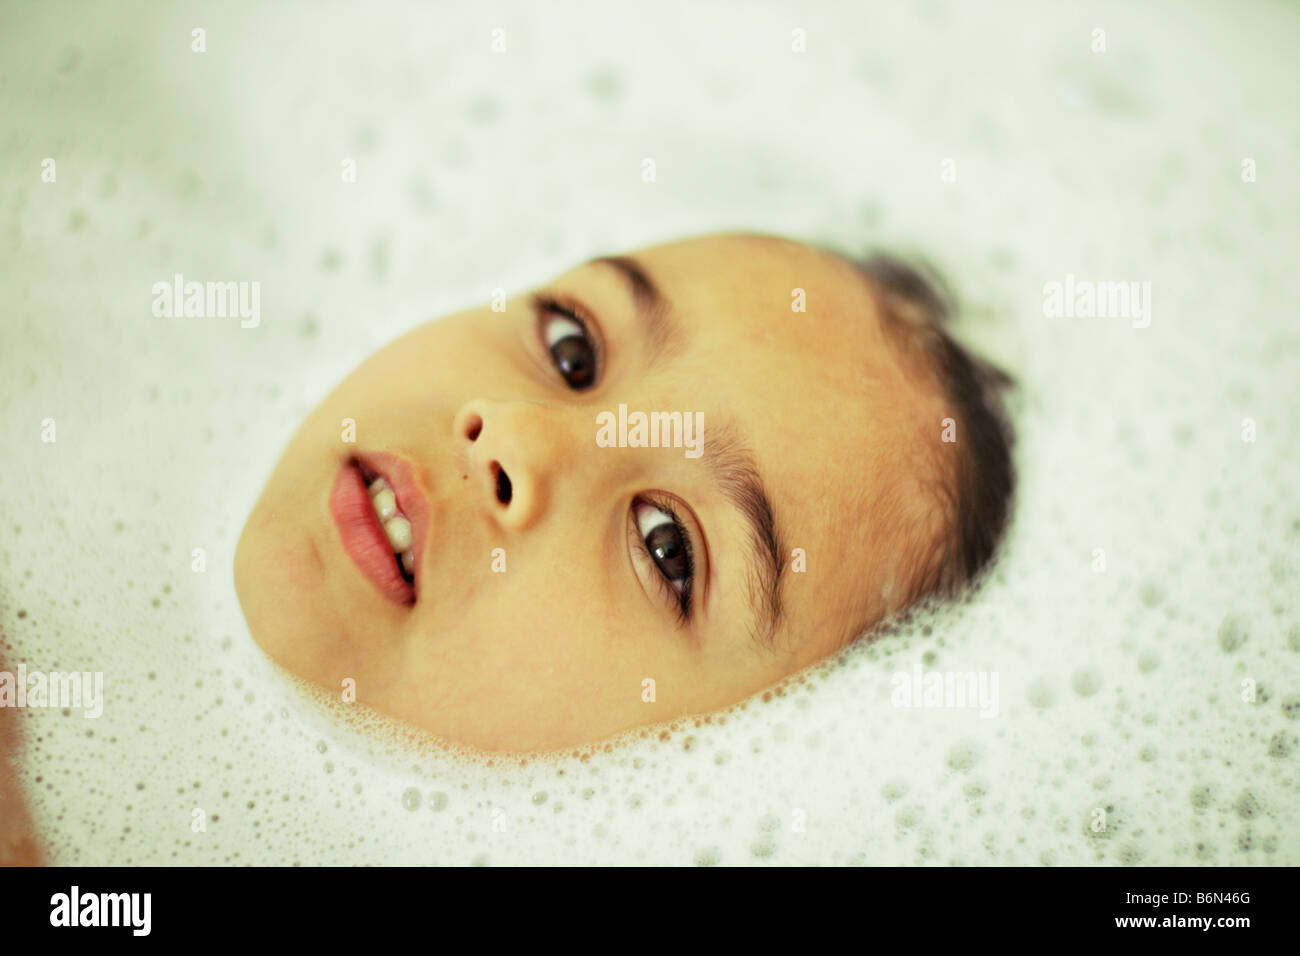 Five year old girl in bubble bath Stock Photo